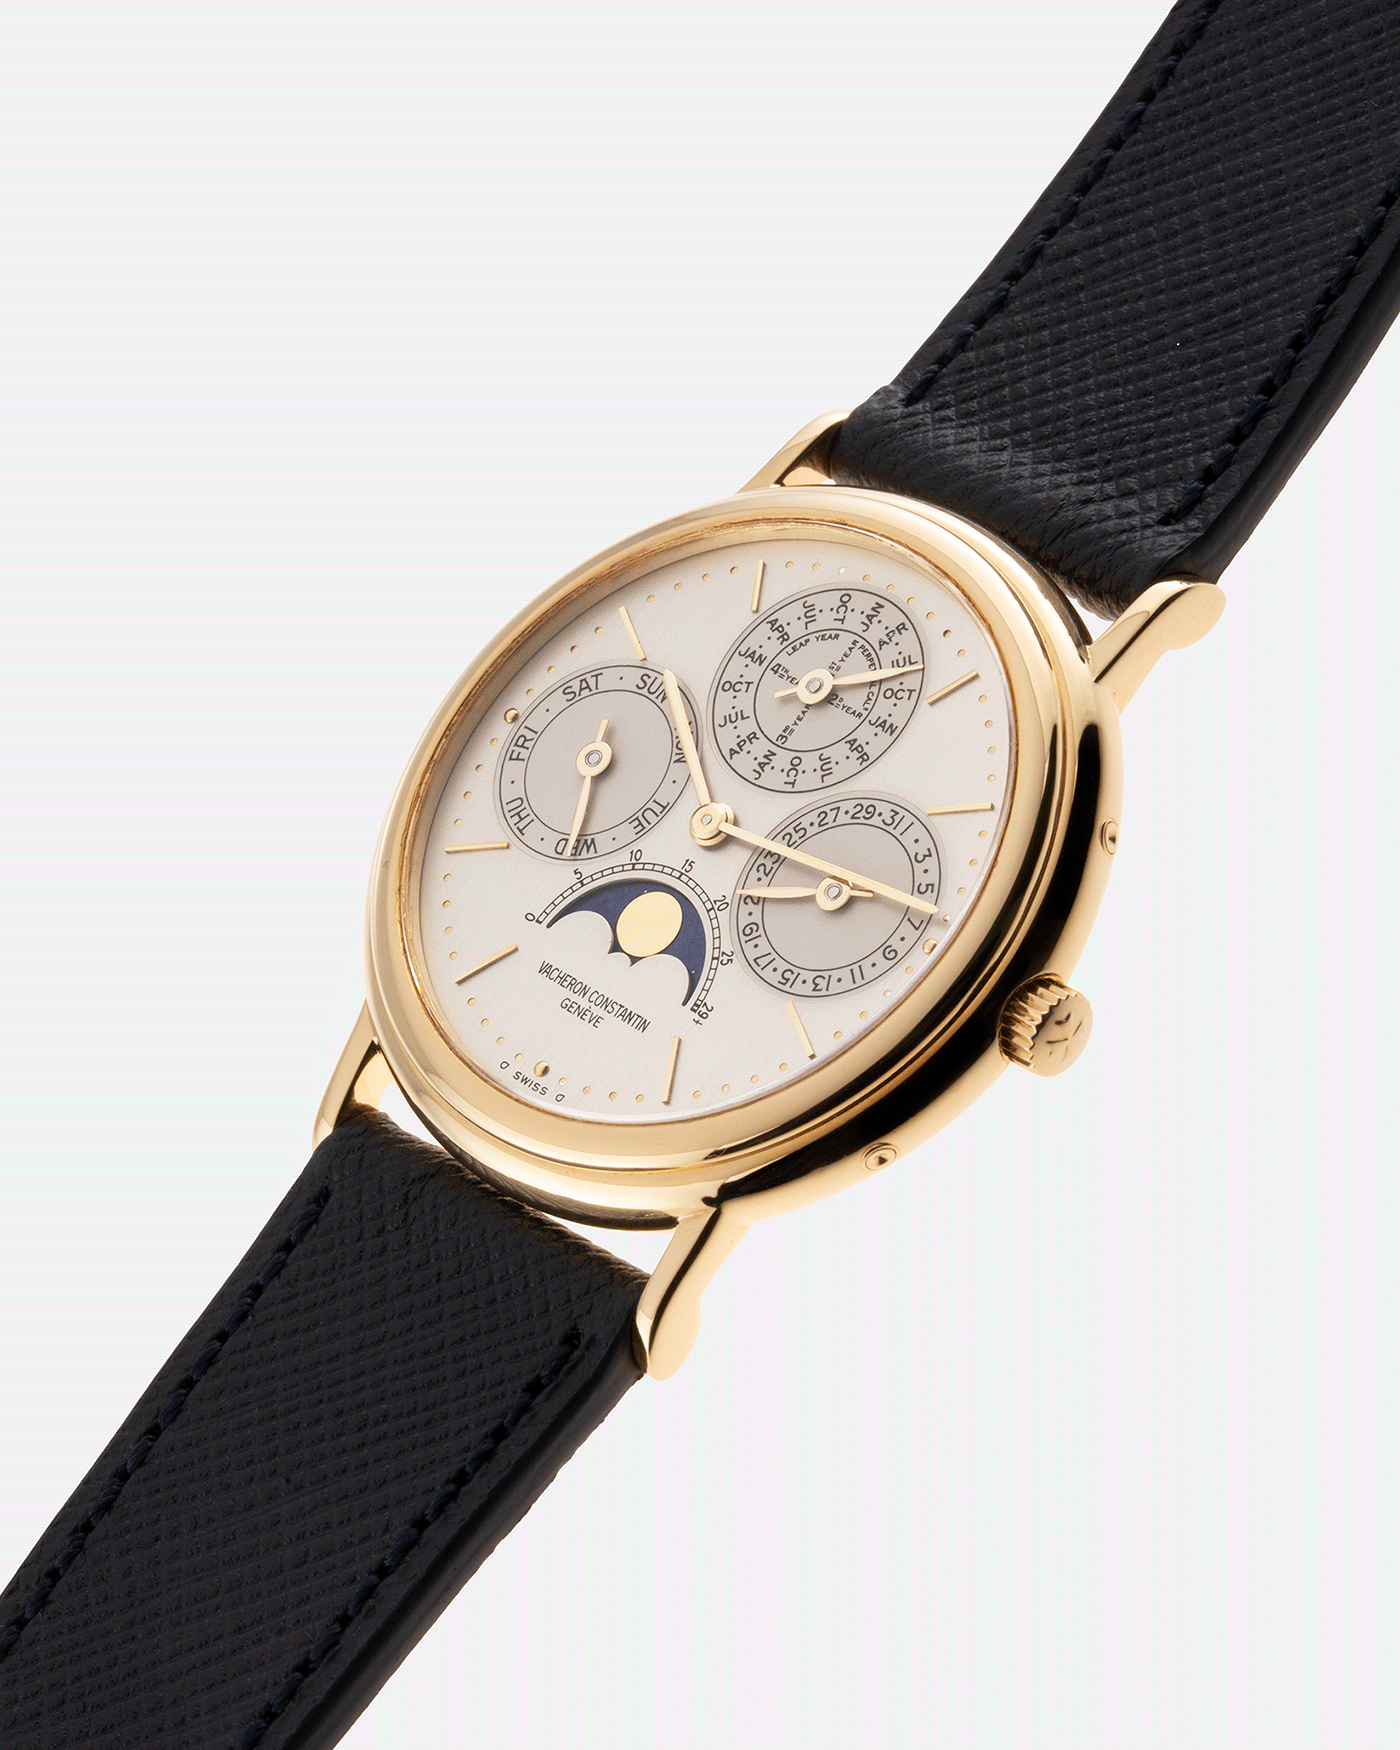 Brand: Vacheron Constantin Year: 1980’s Model: Perpetual Calendar Reference Number: 43031 Material: 18k Yellow Gold Movement: Vacheron Constantin Cal. 1120/2 Case Diameter: 36mm Bracelet: Molequin Navy Blue Texture Calf and Vacheron Constantin Brown Alligator with 18k Yellow Gold Tang Buckle